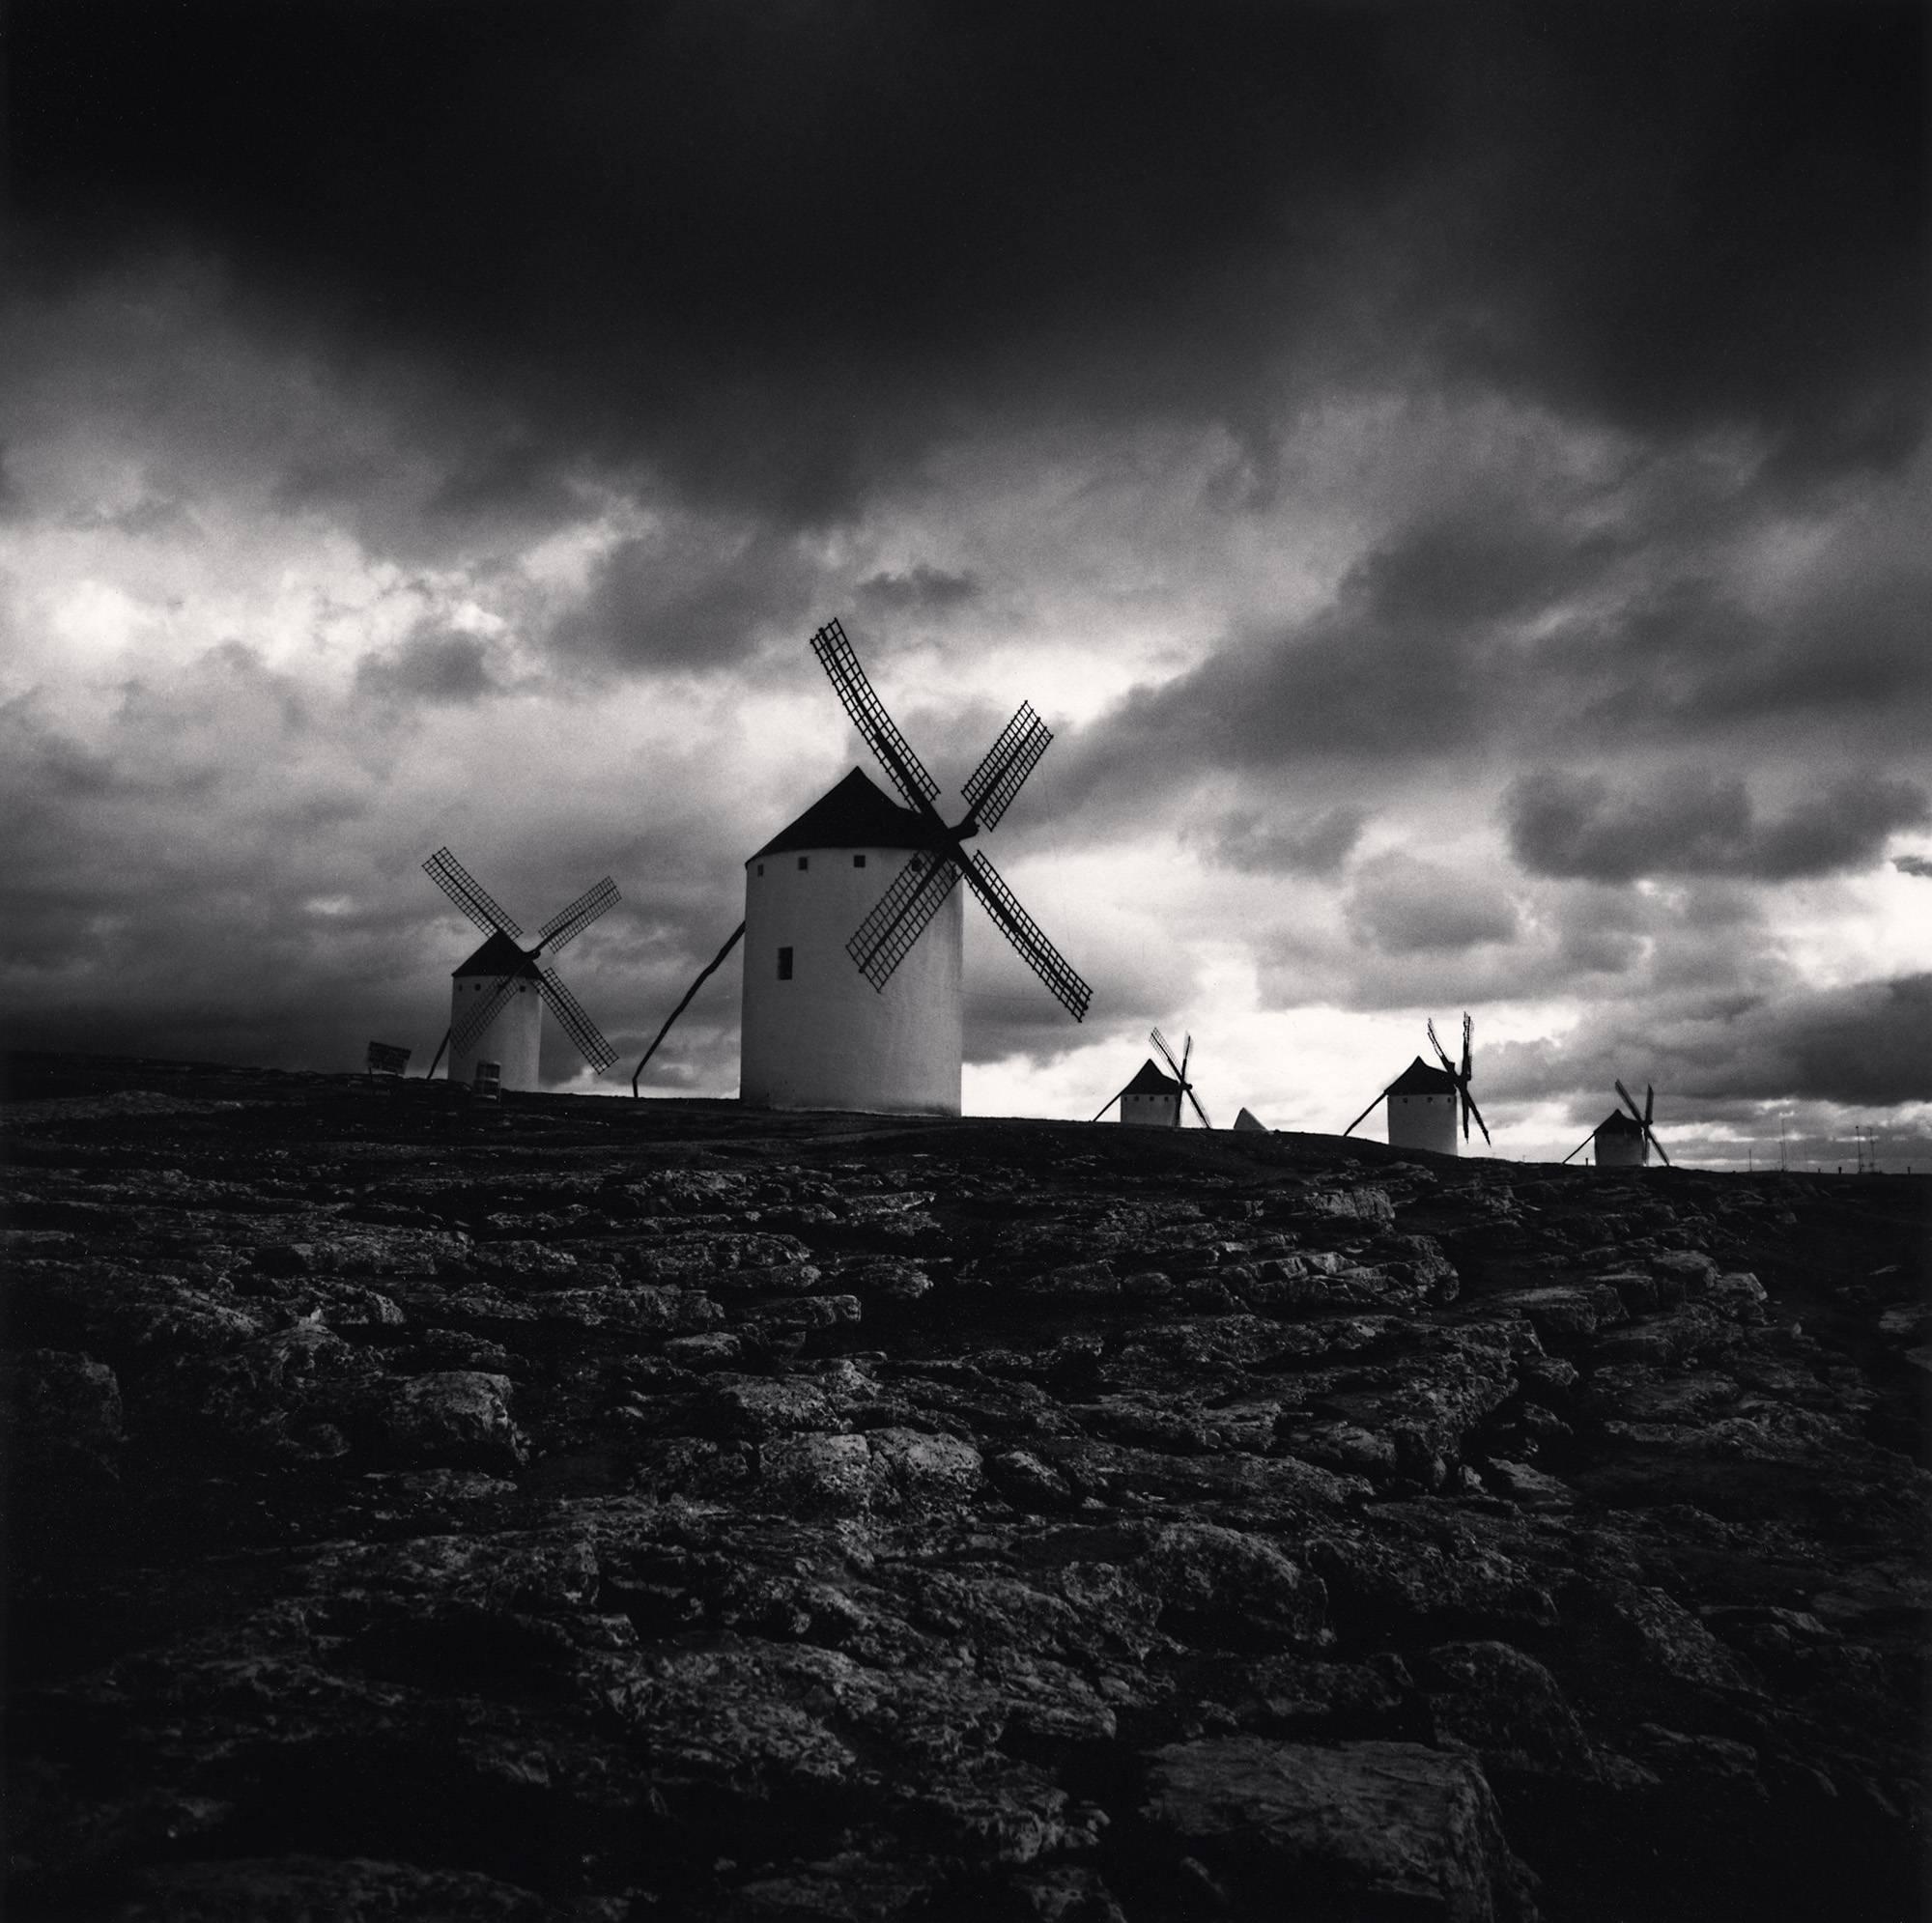 What kind of photos did Michael Kenna take?